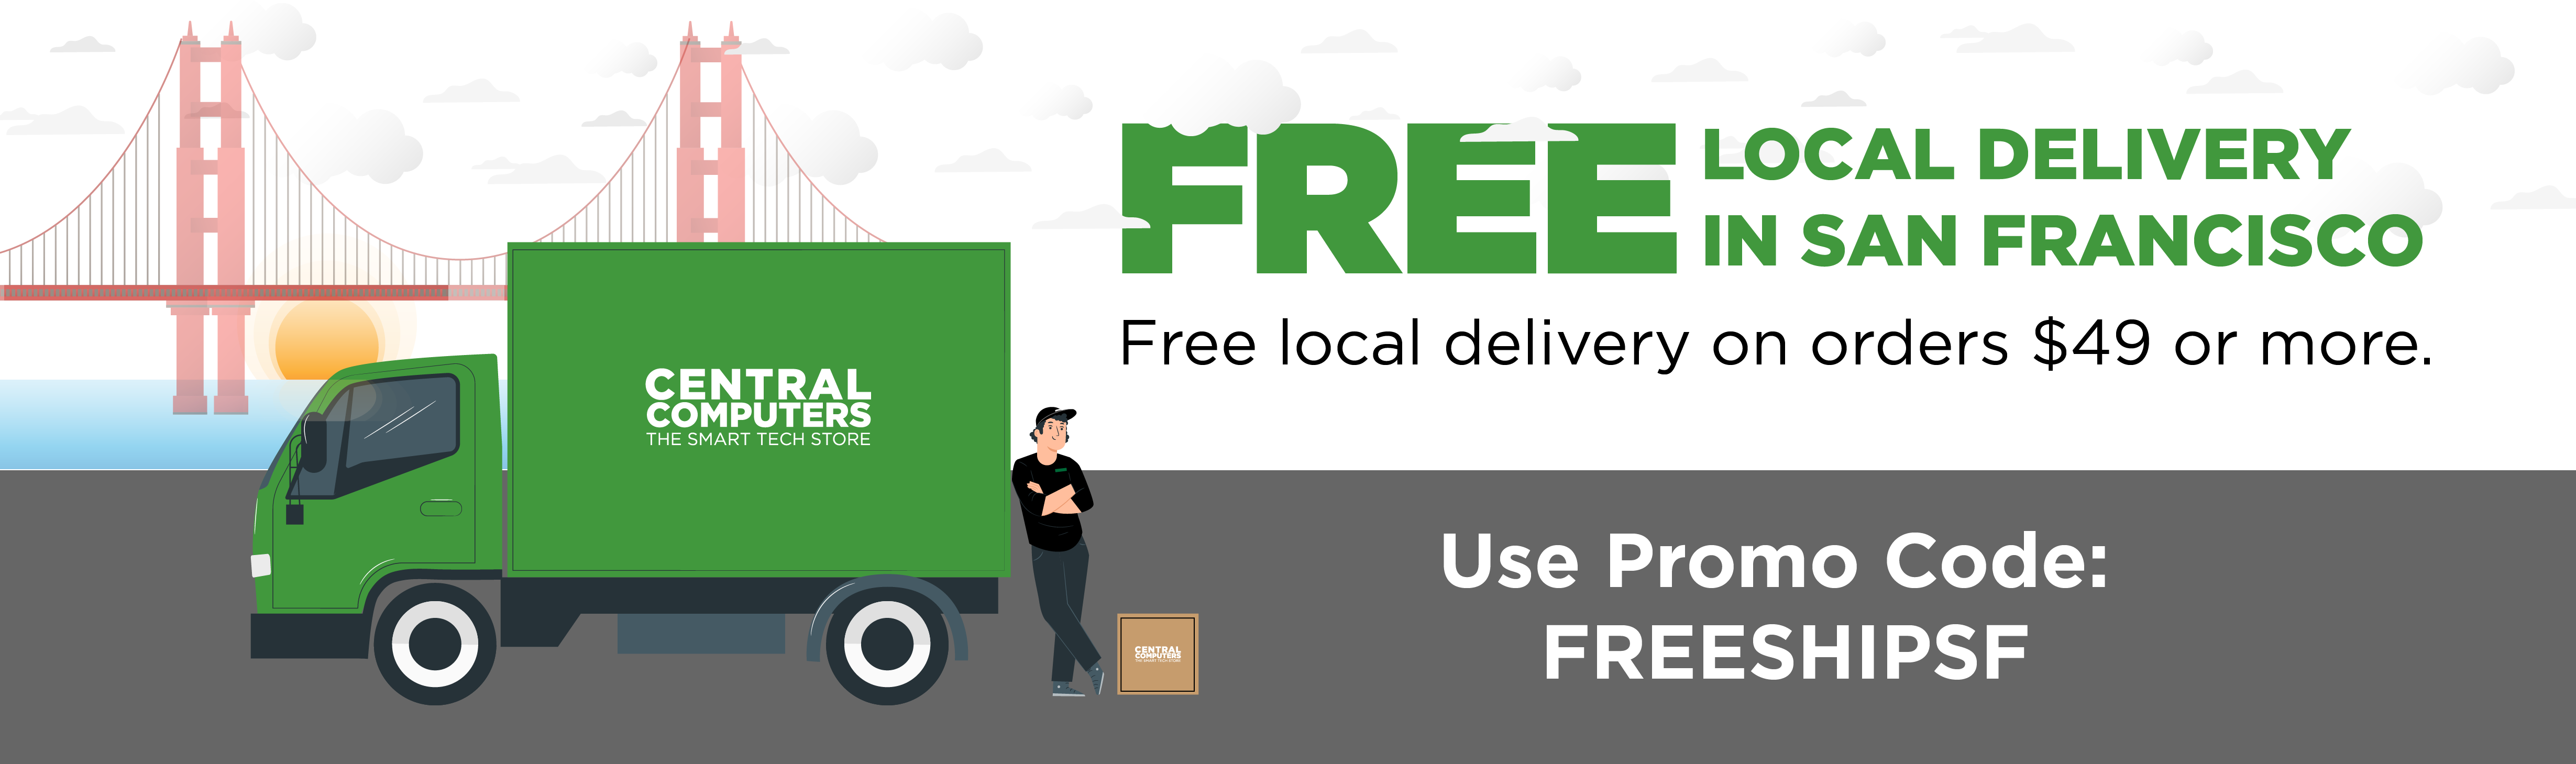 Free Local Delivery in San Francisco